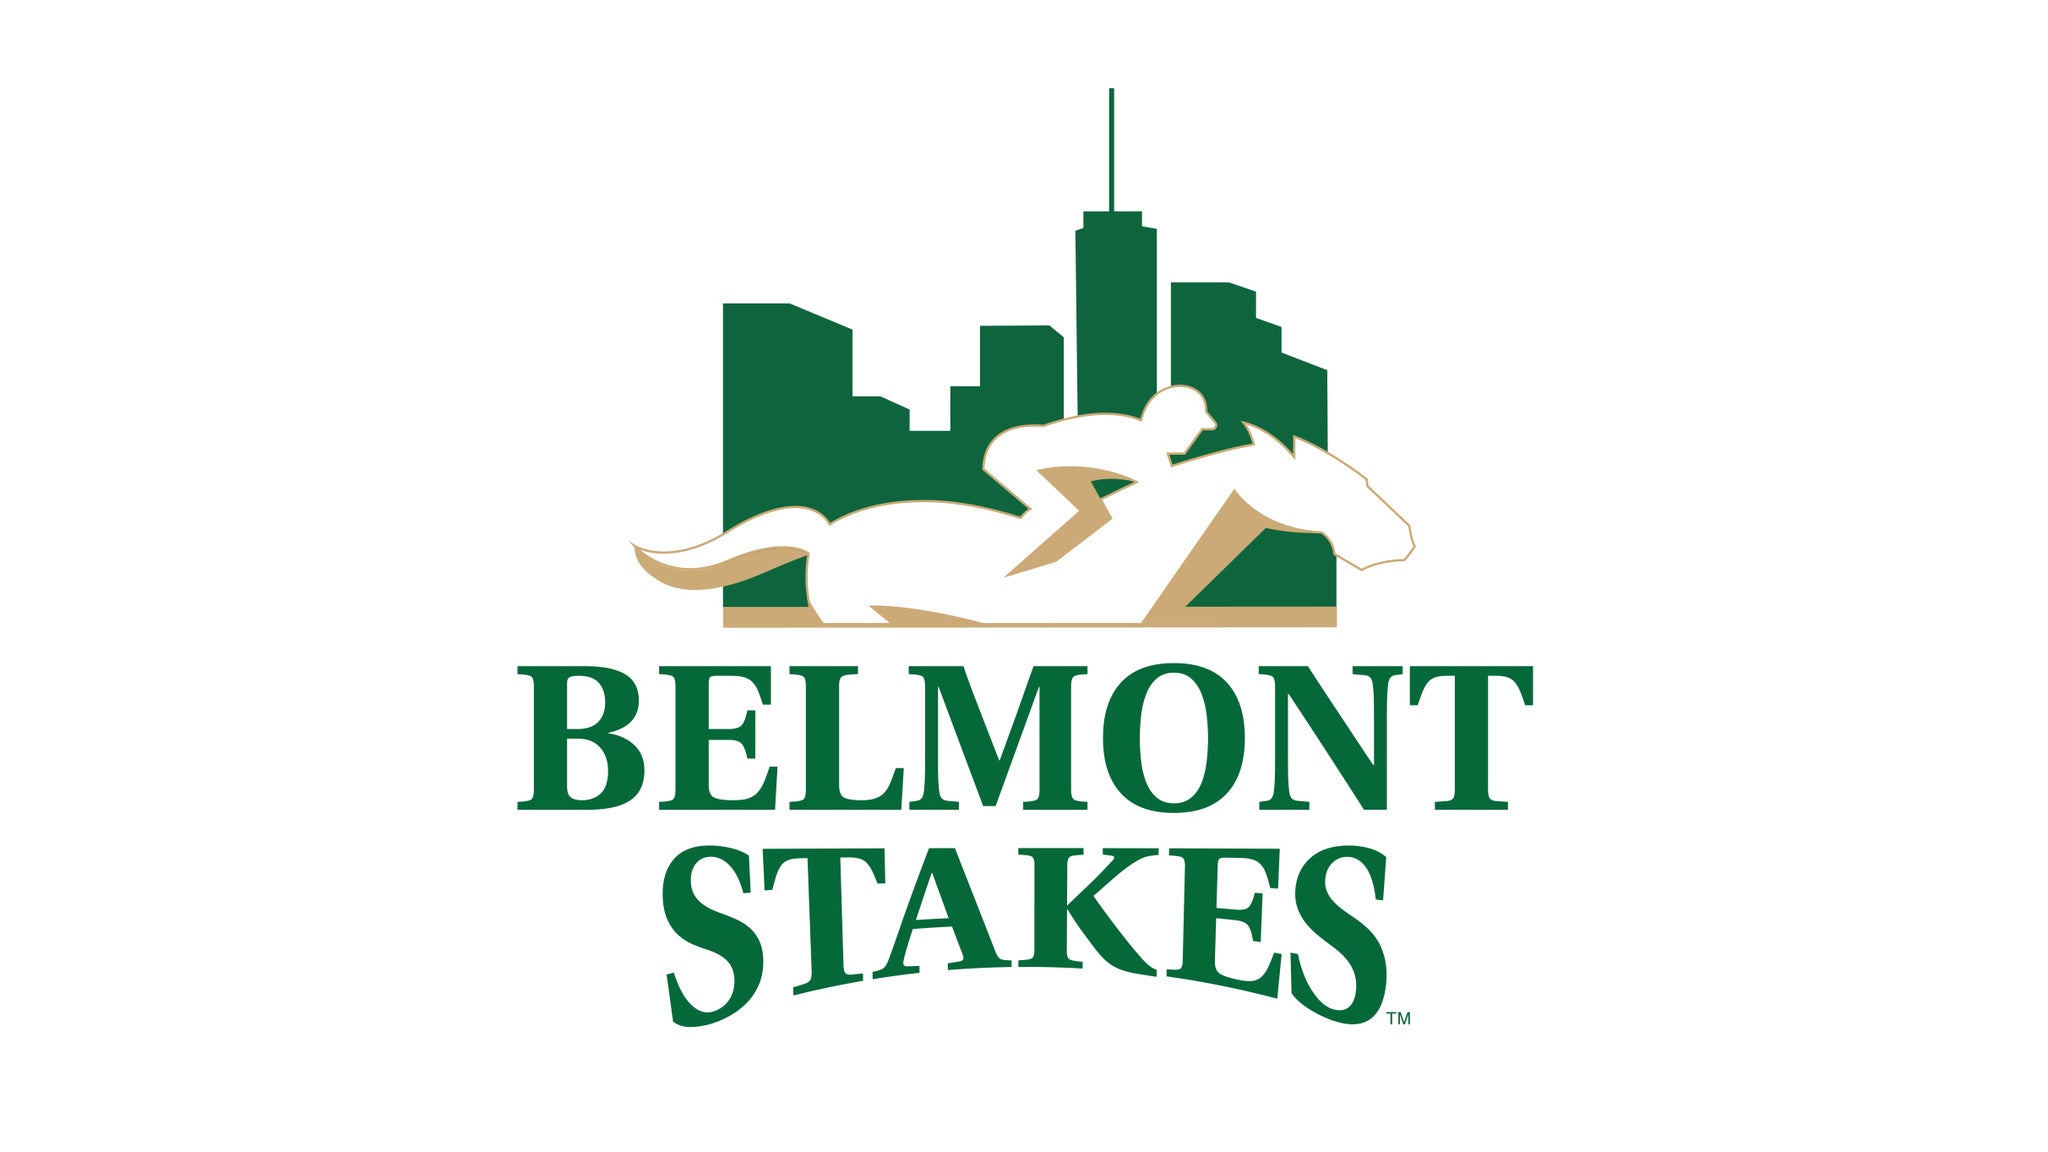 The Belmont Stakes Tickets Single Game Tickets & Schedule